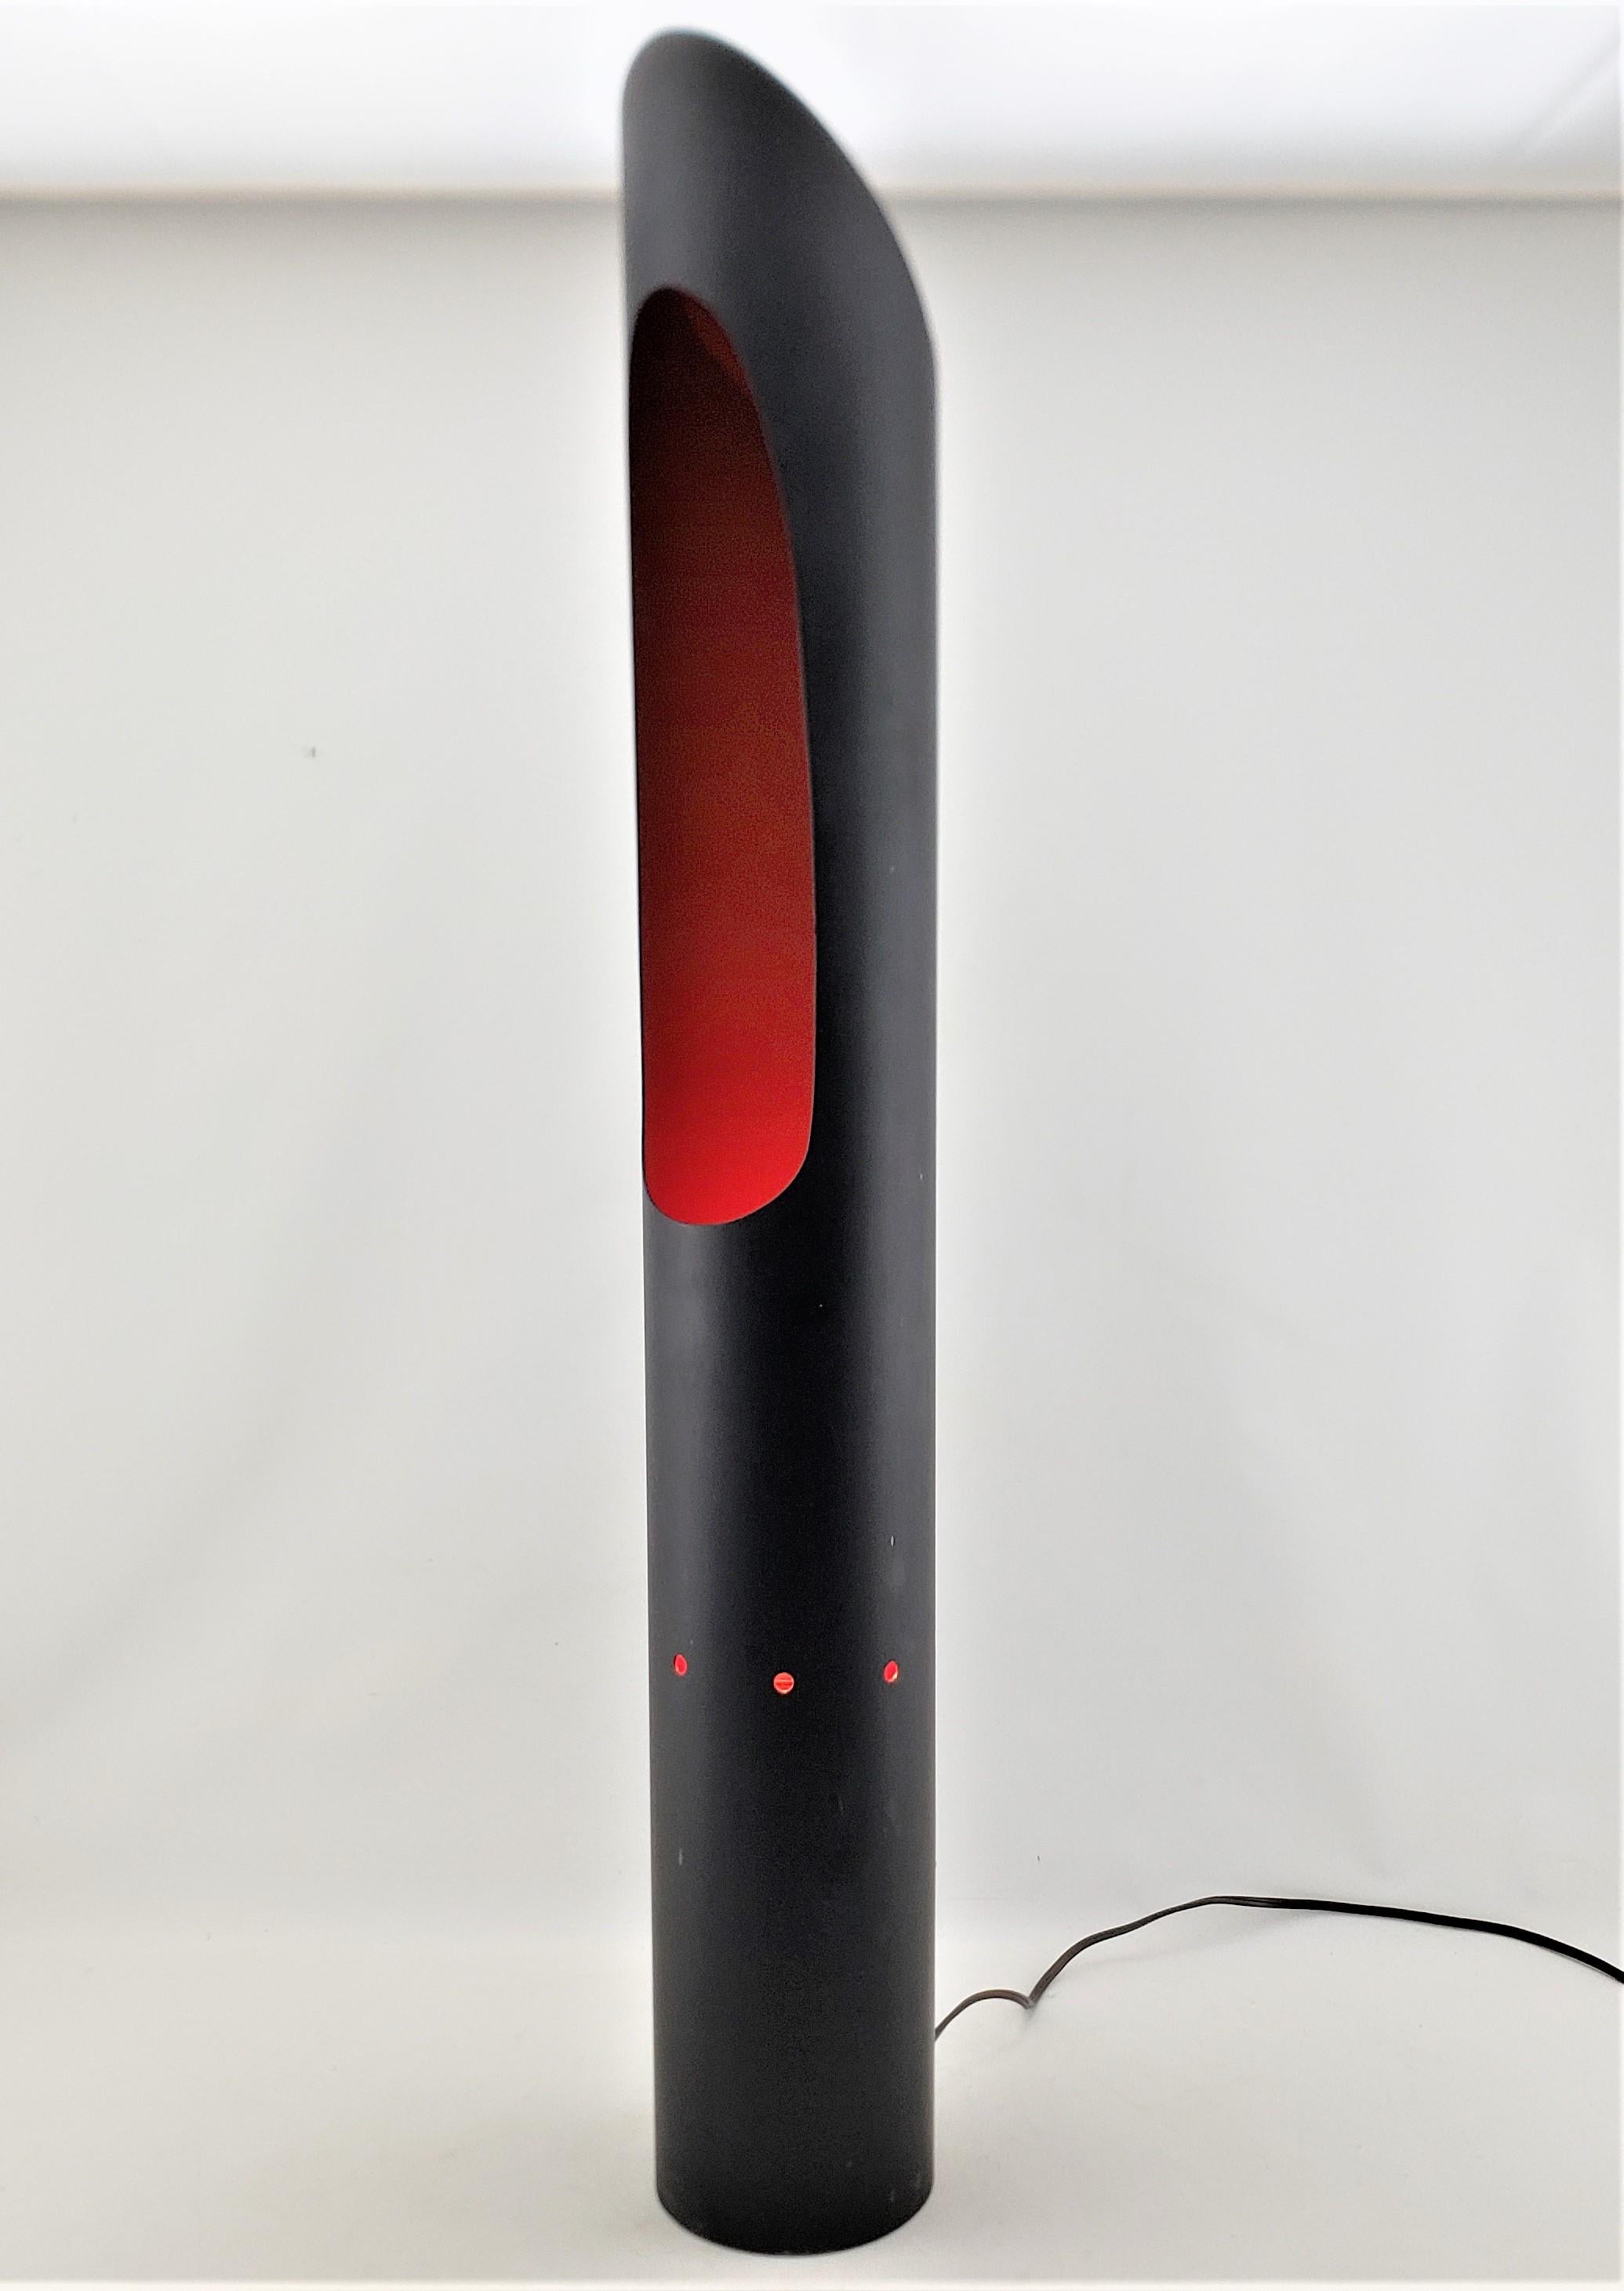 This Mid-Century Modern or Pop Art styled floor lamp is unsigned, but presumed to have originated from Canada, and dating to approximately 1970 and done in the period 